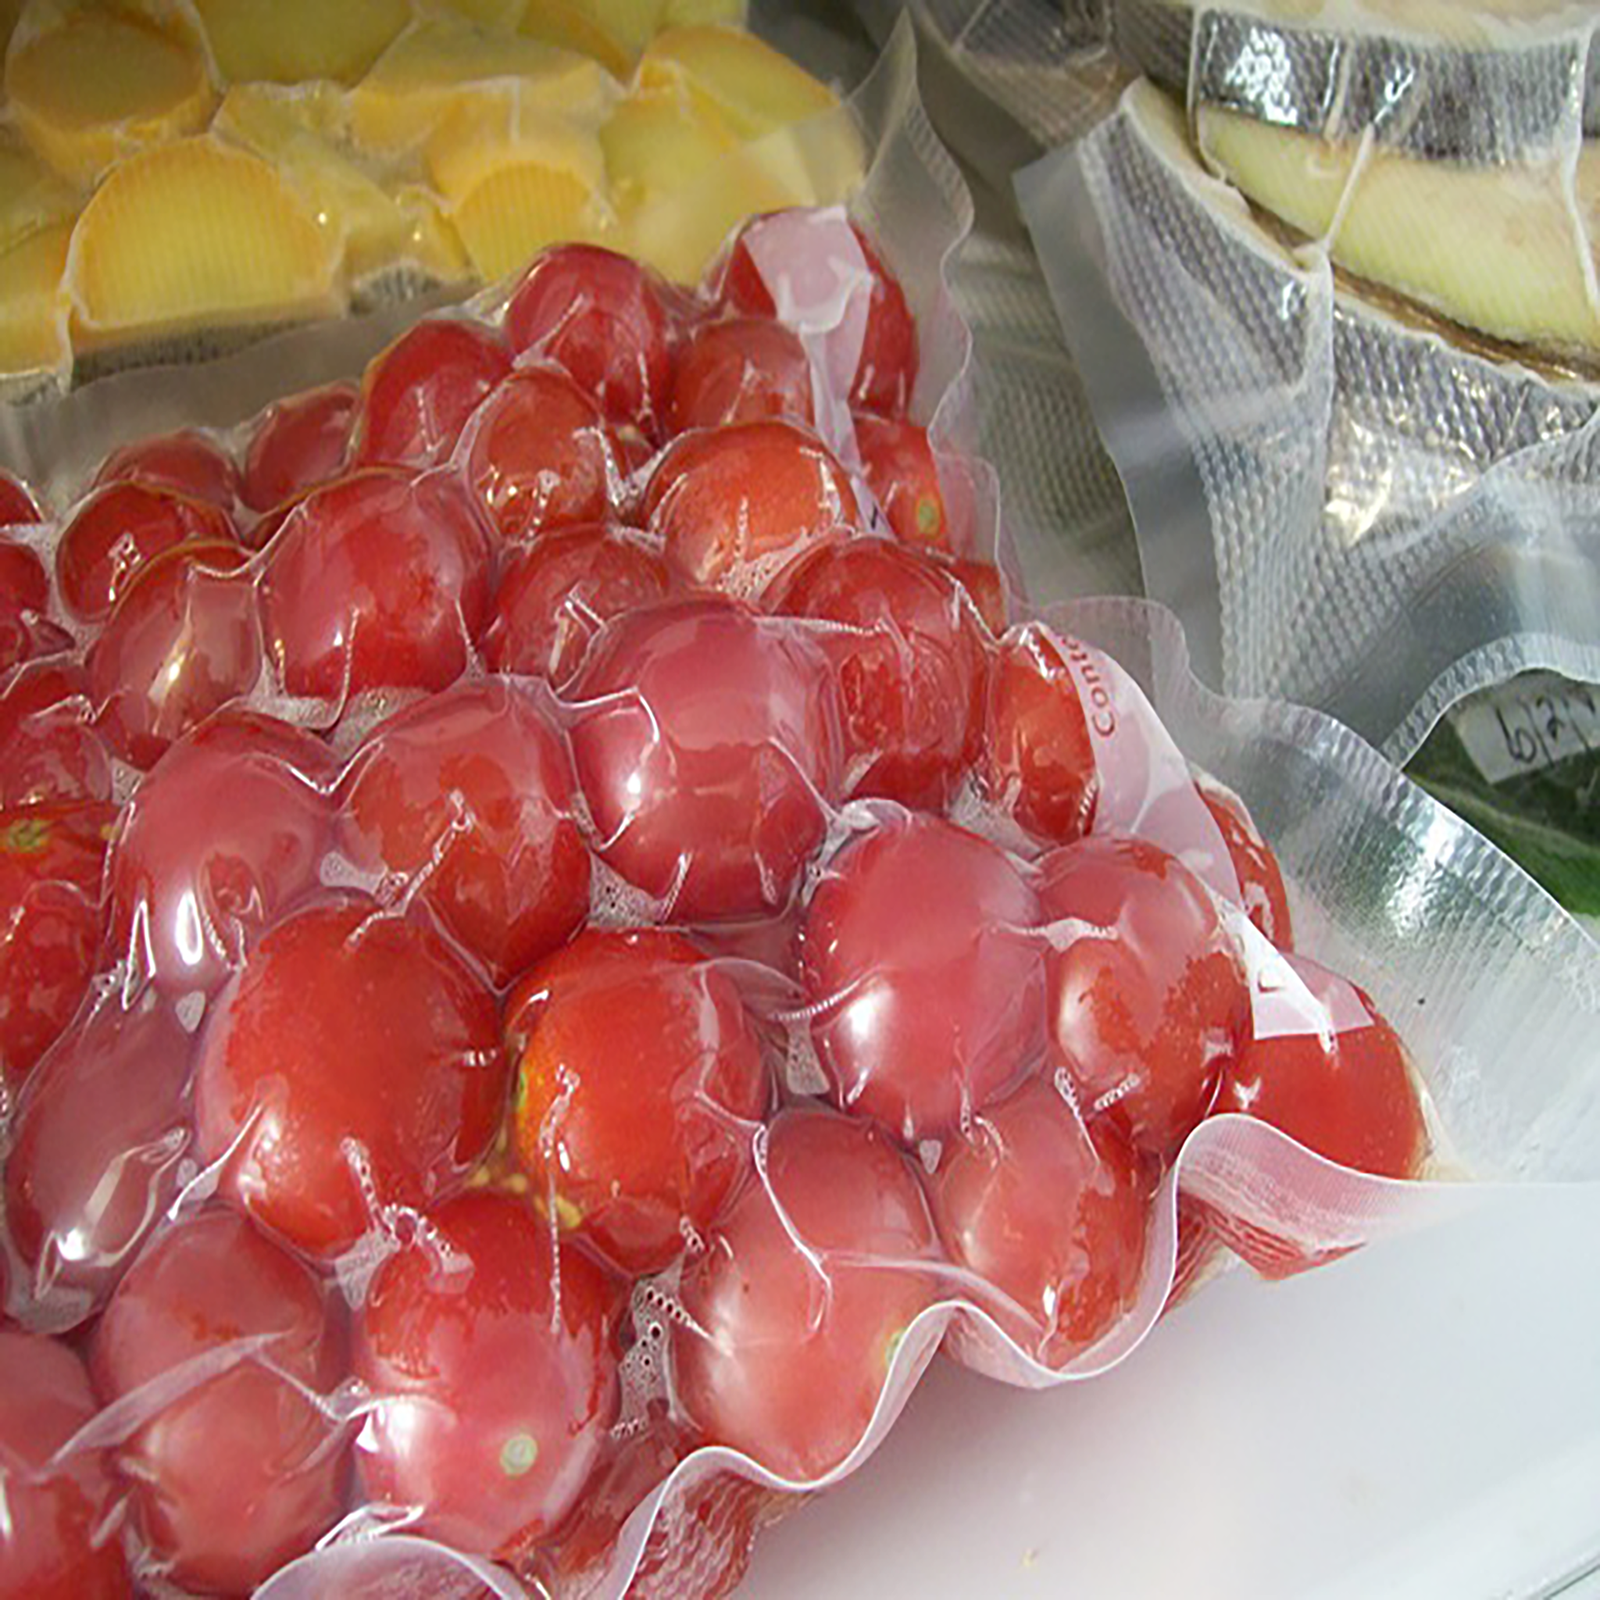 Different red, green and yellow vegetables vacuumed sealed in a JORESTECH embosses vacuum sealer bag